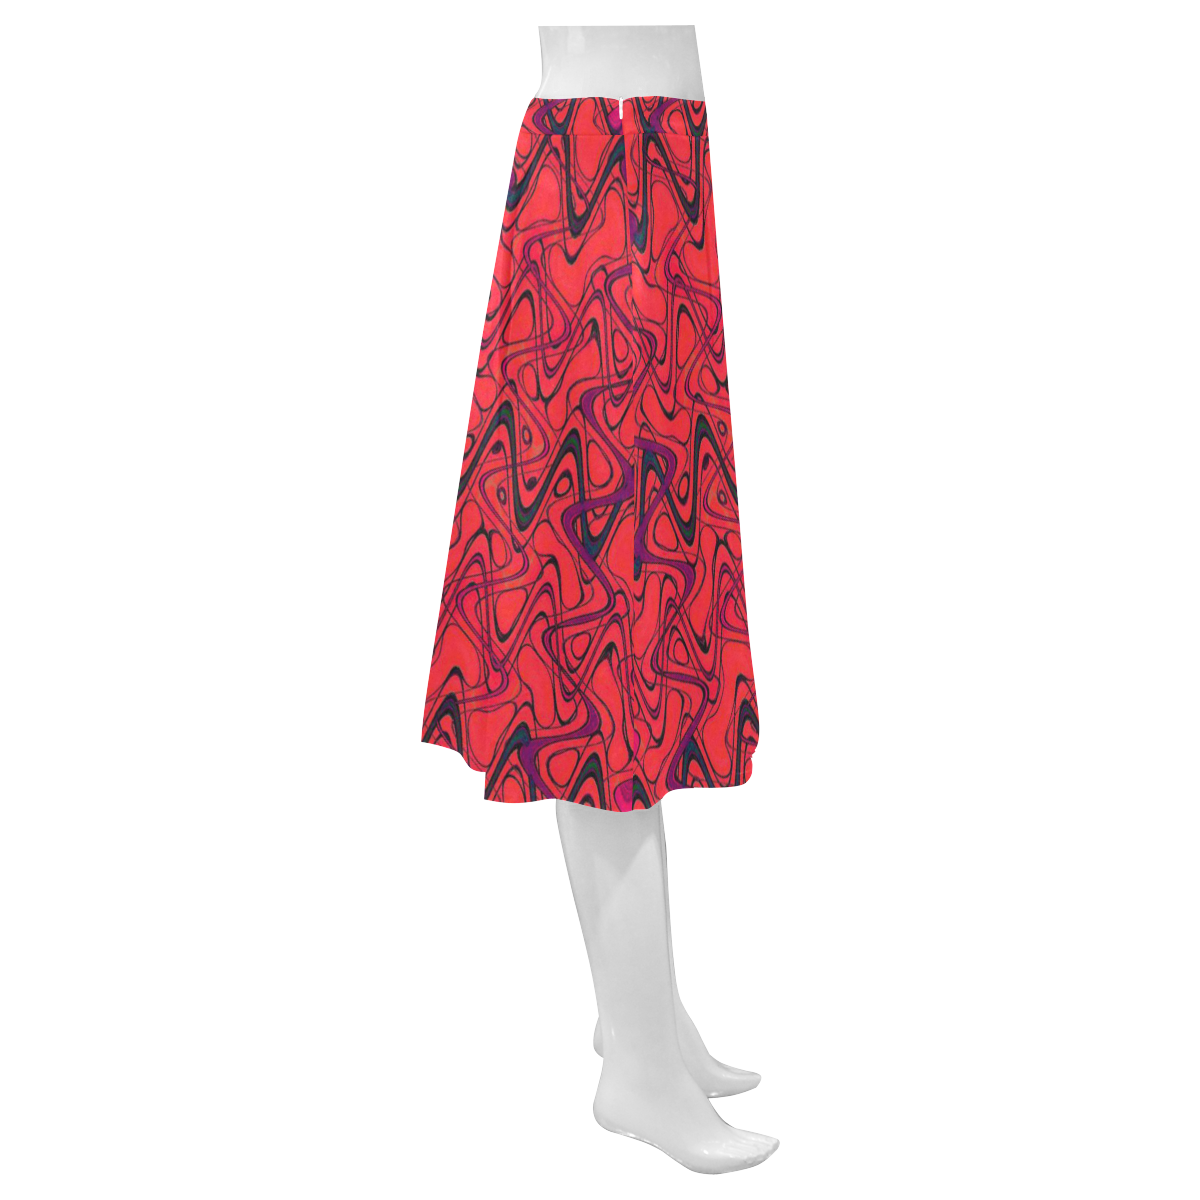 Red and Black Waves Mnemosyne Women's Crepe Skirt (Model D16)